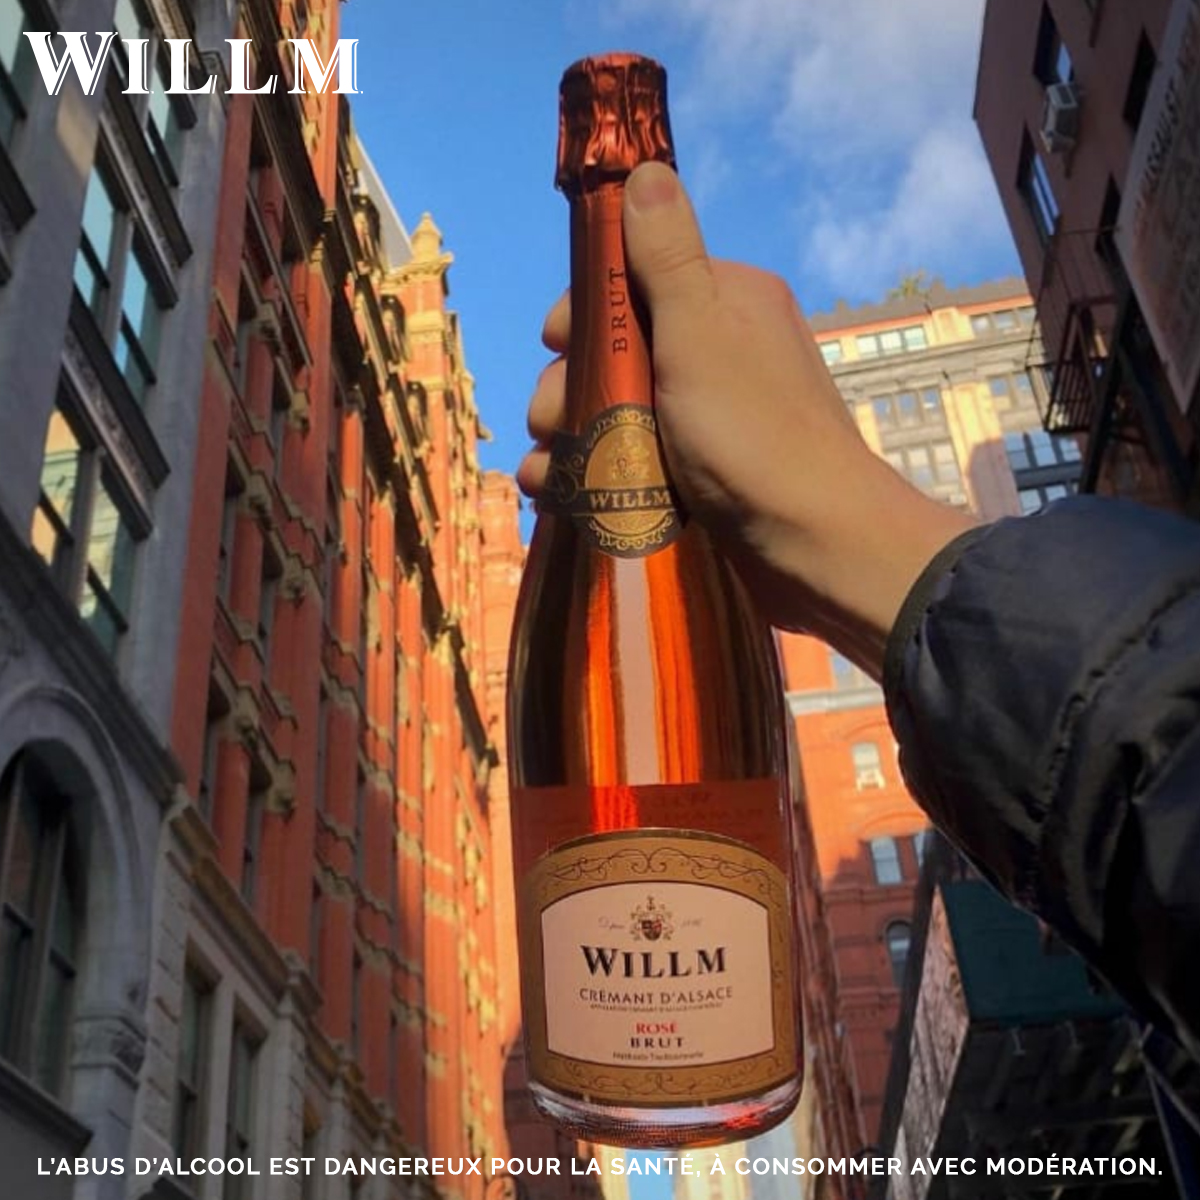 What are you planning this year for #ValentinesDay? Looking for inspiration? Follow @fidiwine's advice on Instagram! Our #Crémant d'Alsace Rosé goes perfectly with a tuna tartare, scallops wrapped in bacon, or a crème brûlée. Share your Valentine's Day #menus with us!